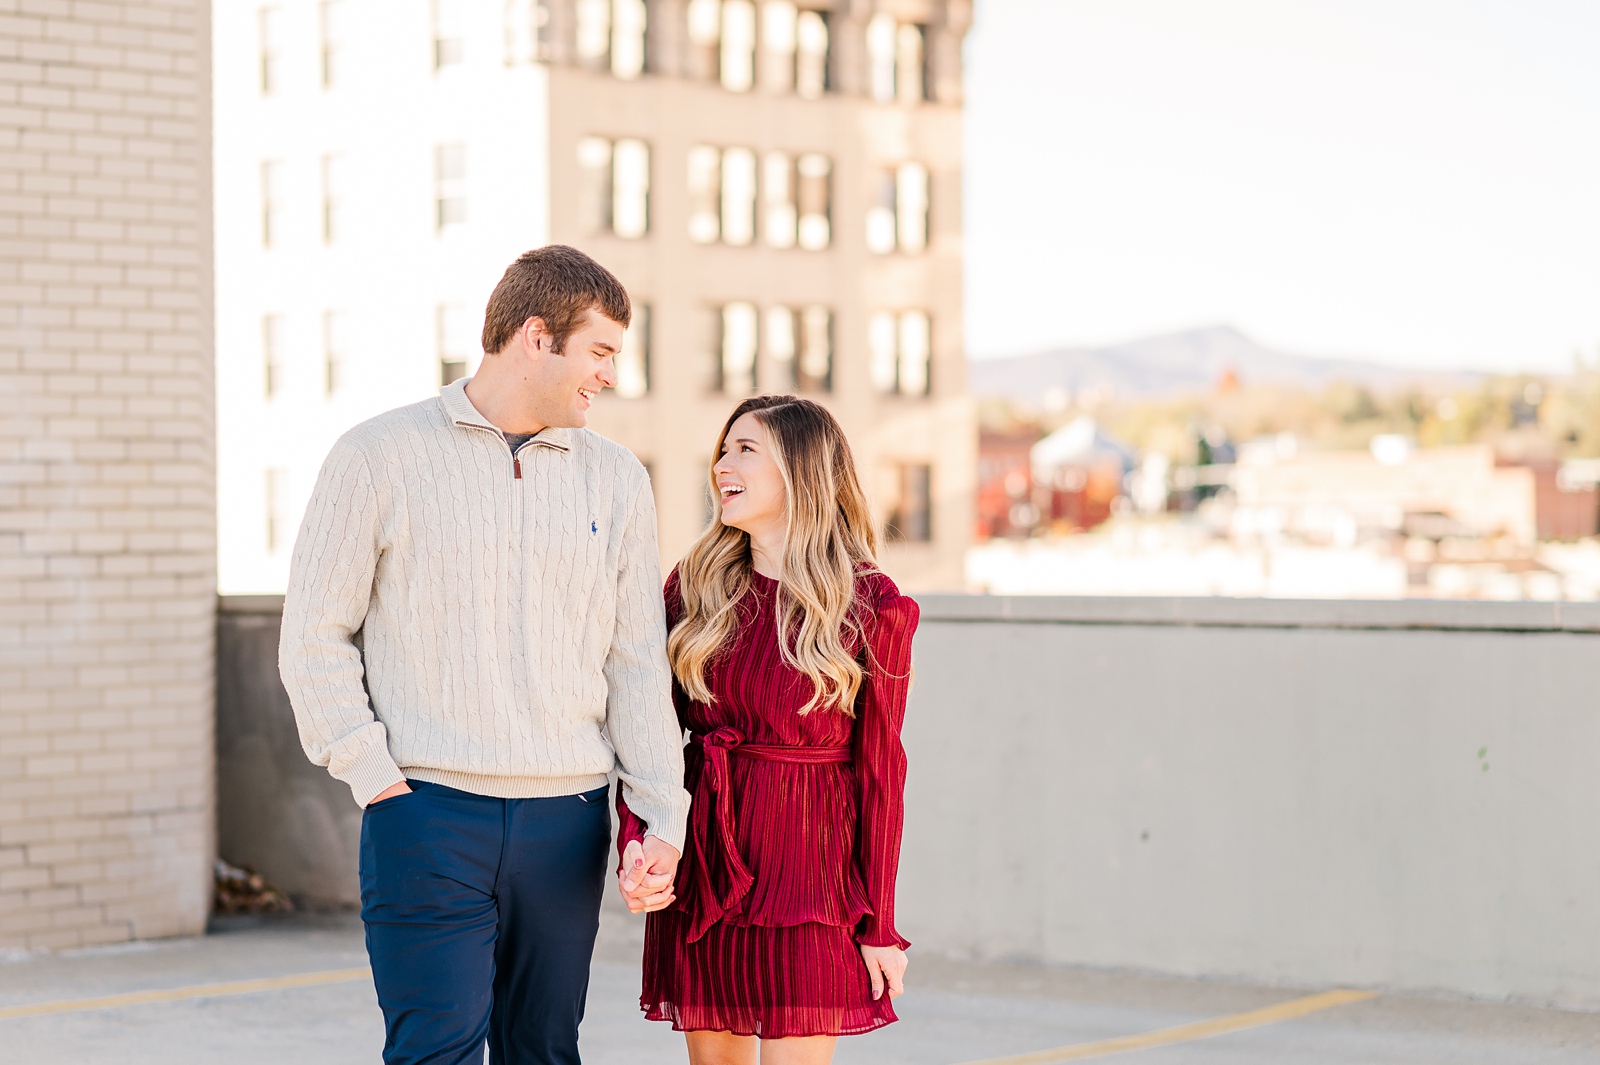 Downtown Roanoke Engagement Session on Rooftop by Virginia Wedding Photographer Kailey Brianne Photography 